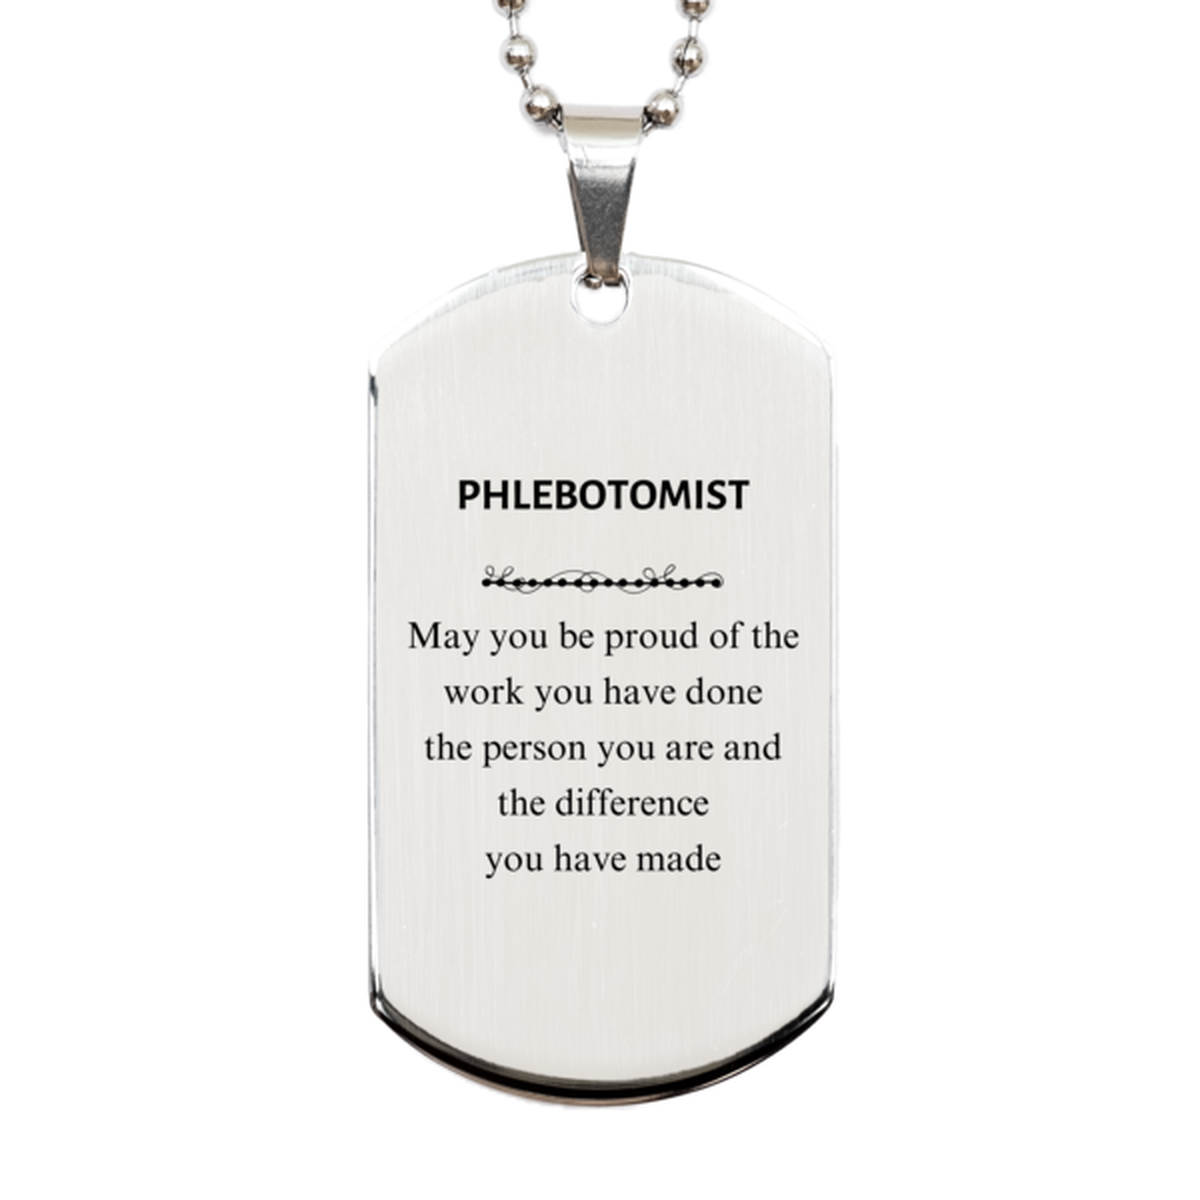 Phlebotomist May you be proud of the work you have done, Retirement Phlebotomist Silver Dog Tag for Colleague Appreciation Gifts Amazing for Phlebotomist